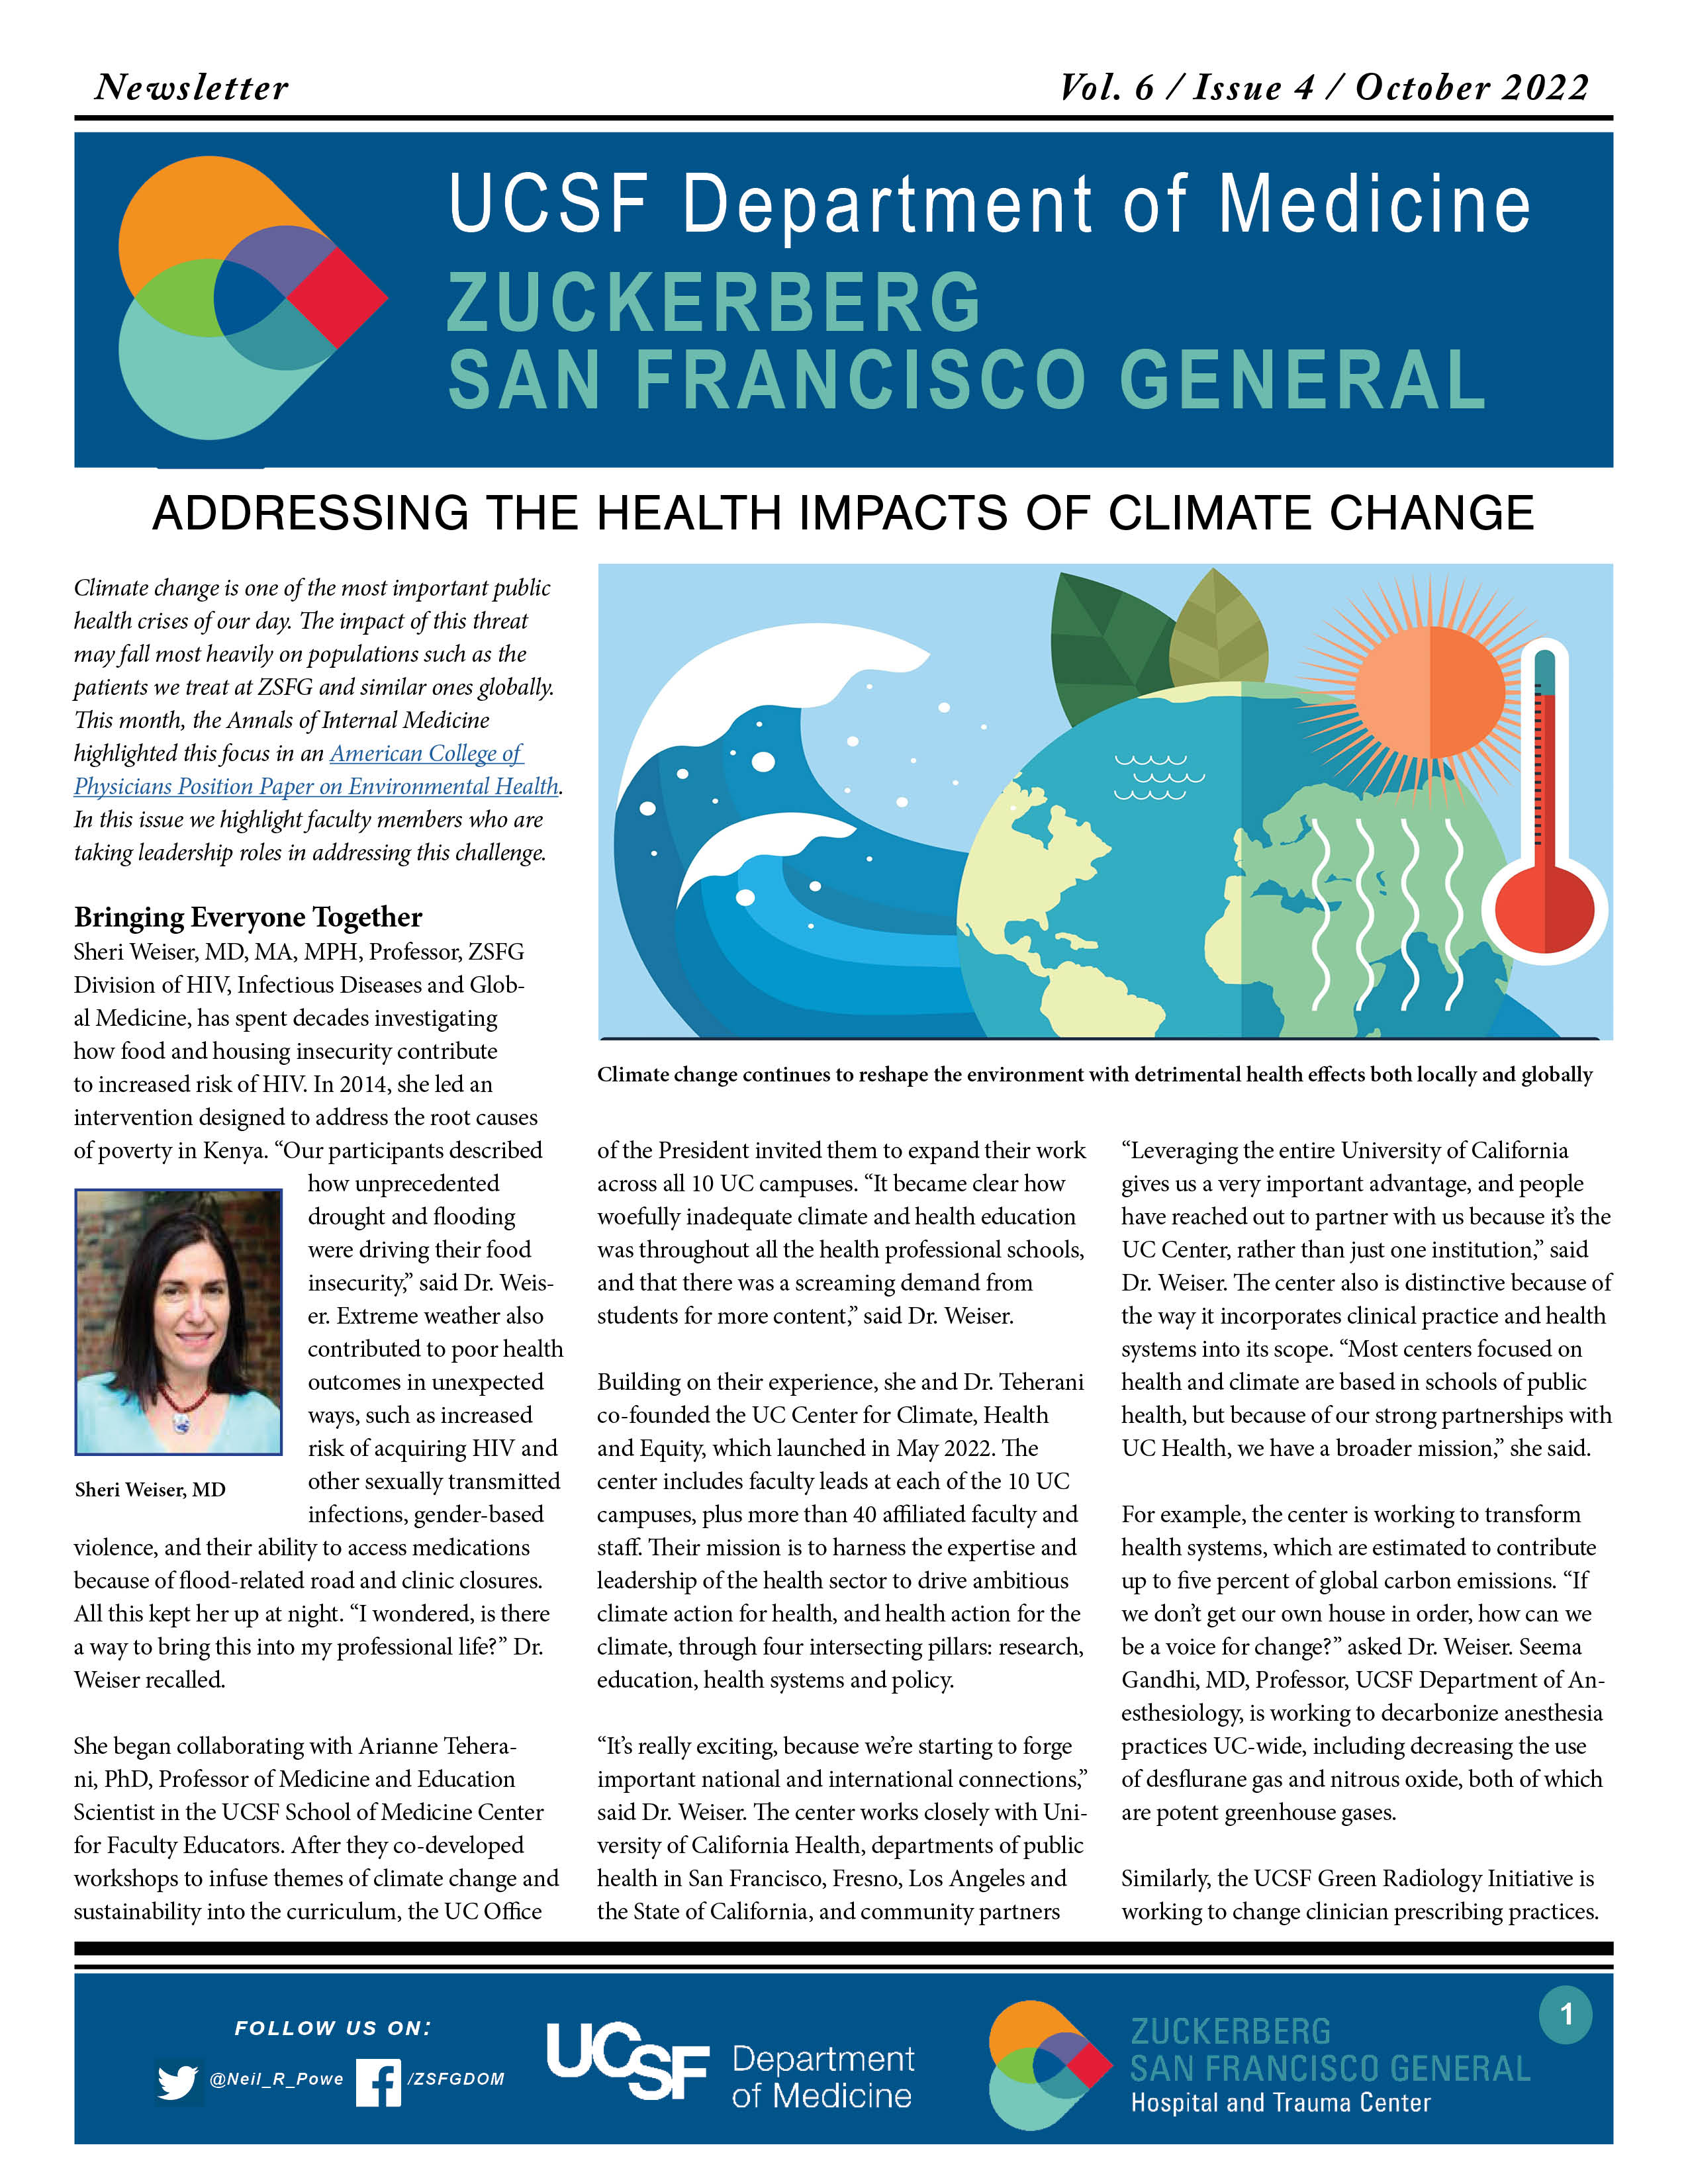 front page of newsletter with graphic of earth with wave and thermometer.